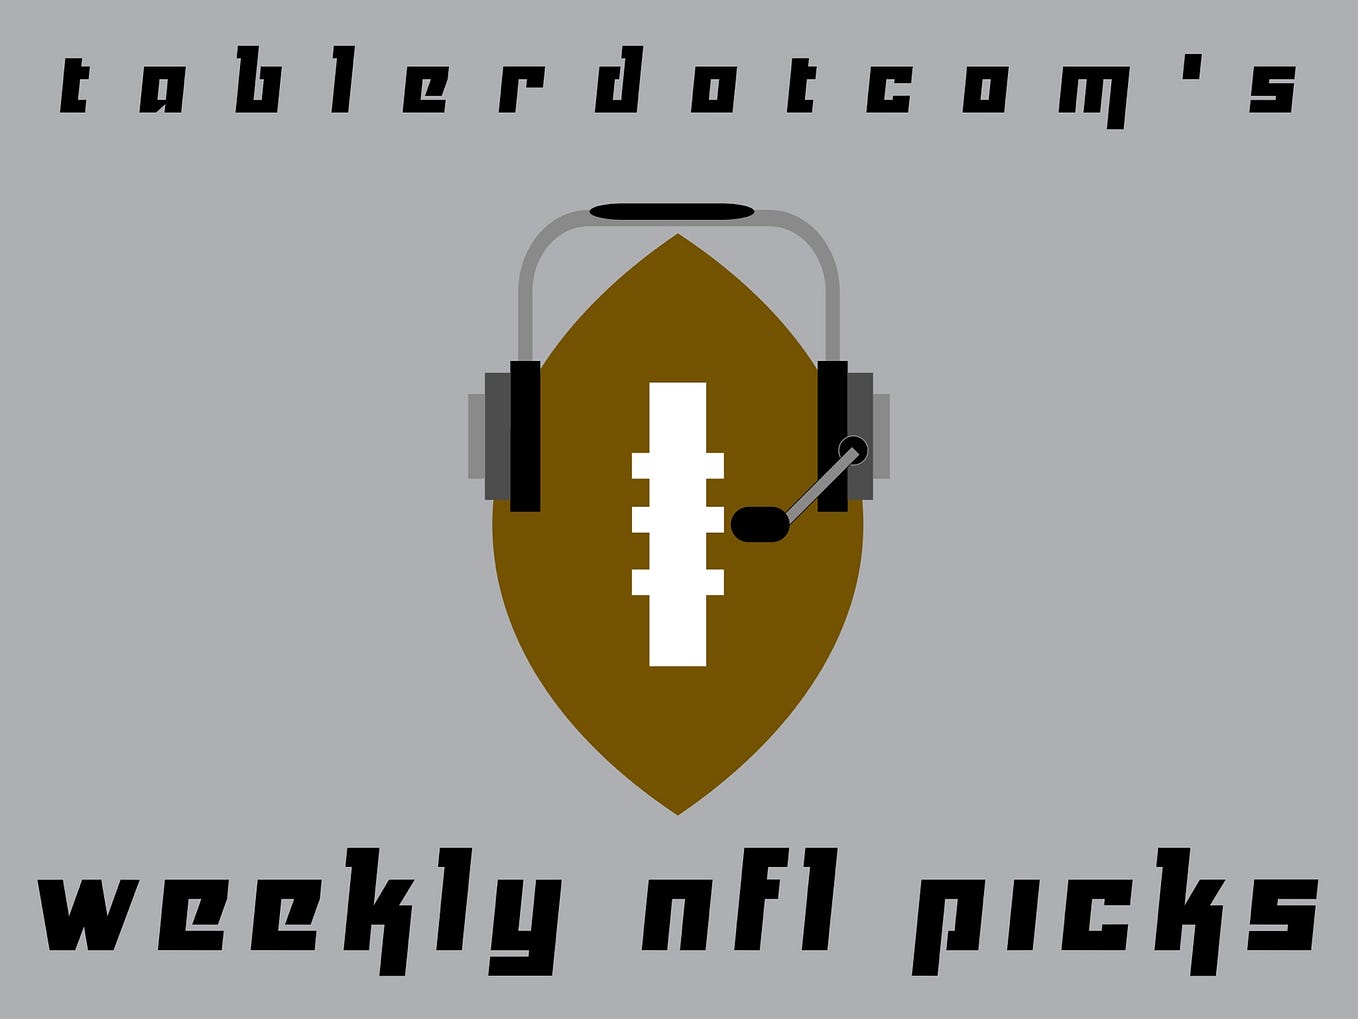 NFL Week 6 Predictions!. Follow me on Twitter by